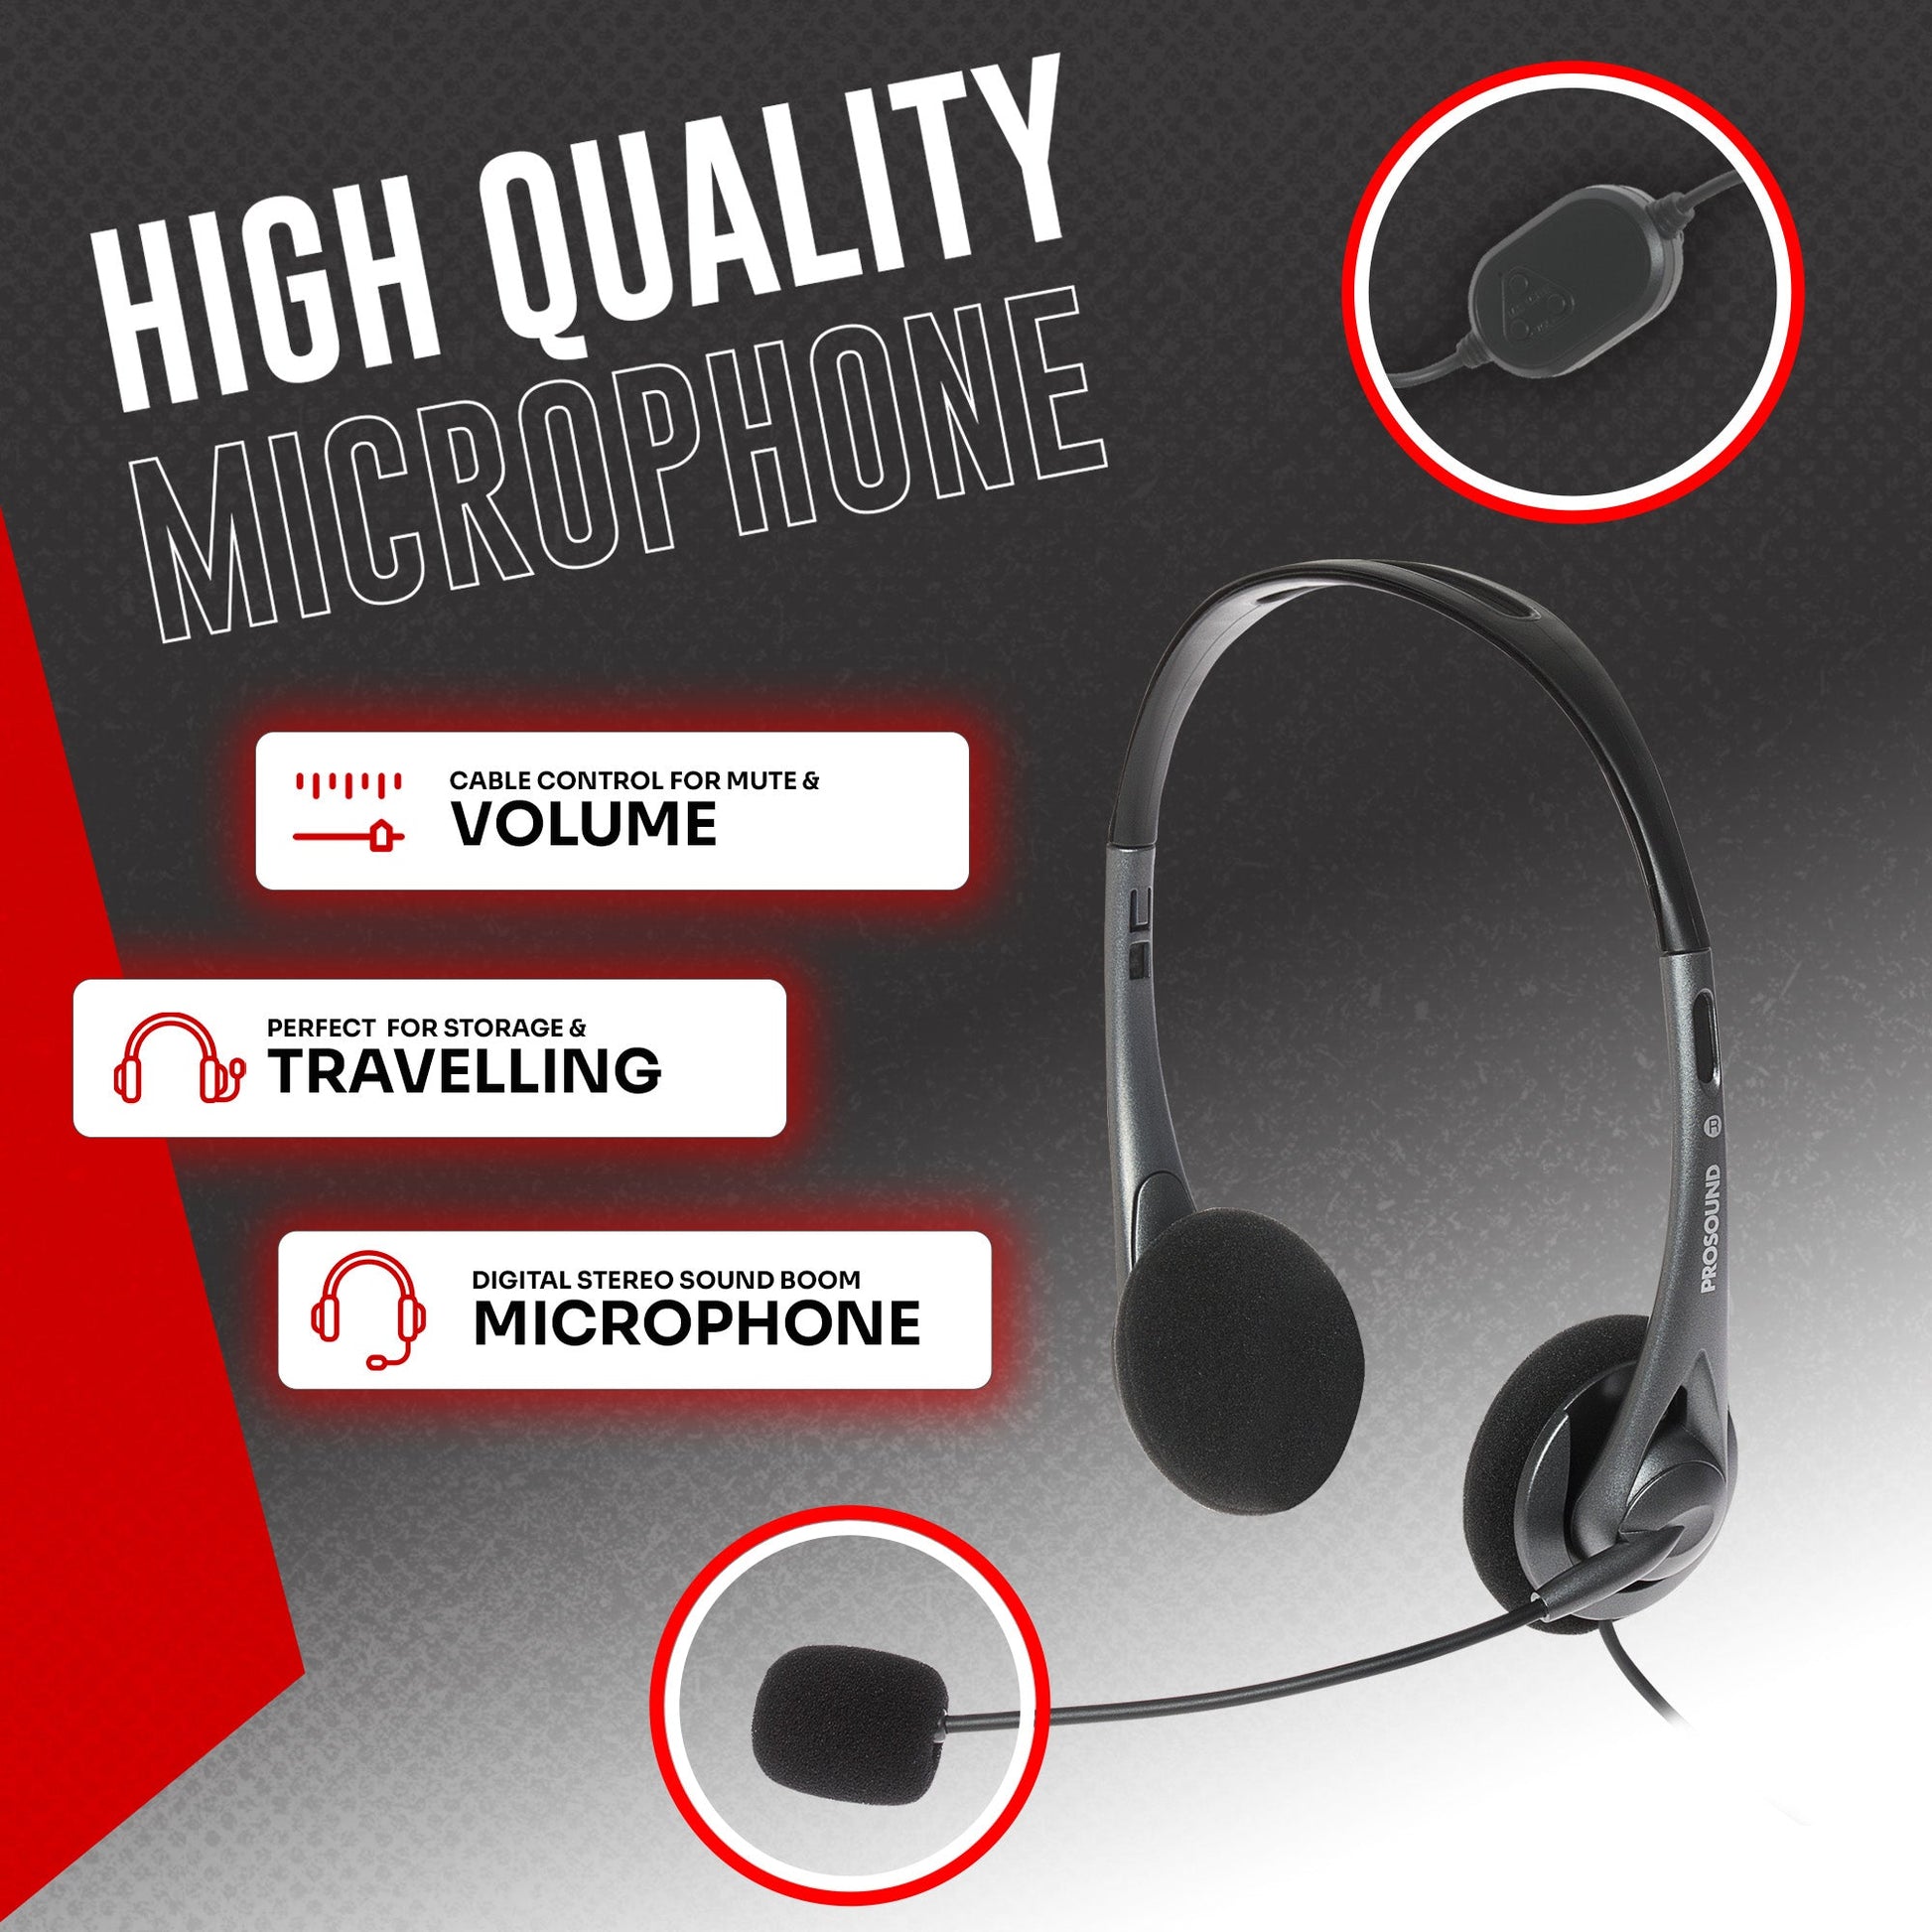 ProSound USB-A Stereo Headset with Electet Condenser Boom Microphone & 1.2m Cable - maplin.co.uk